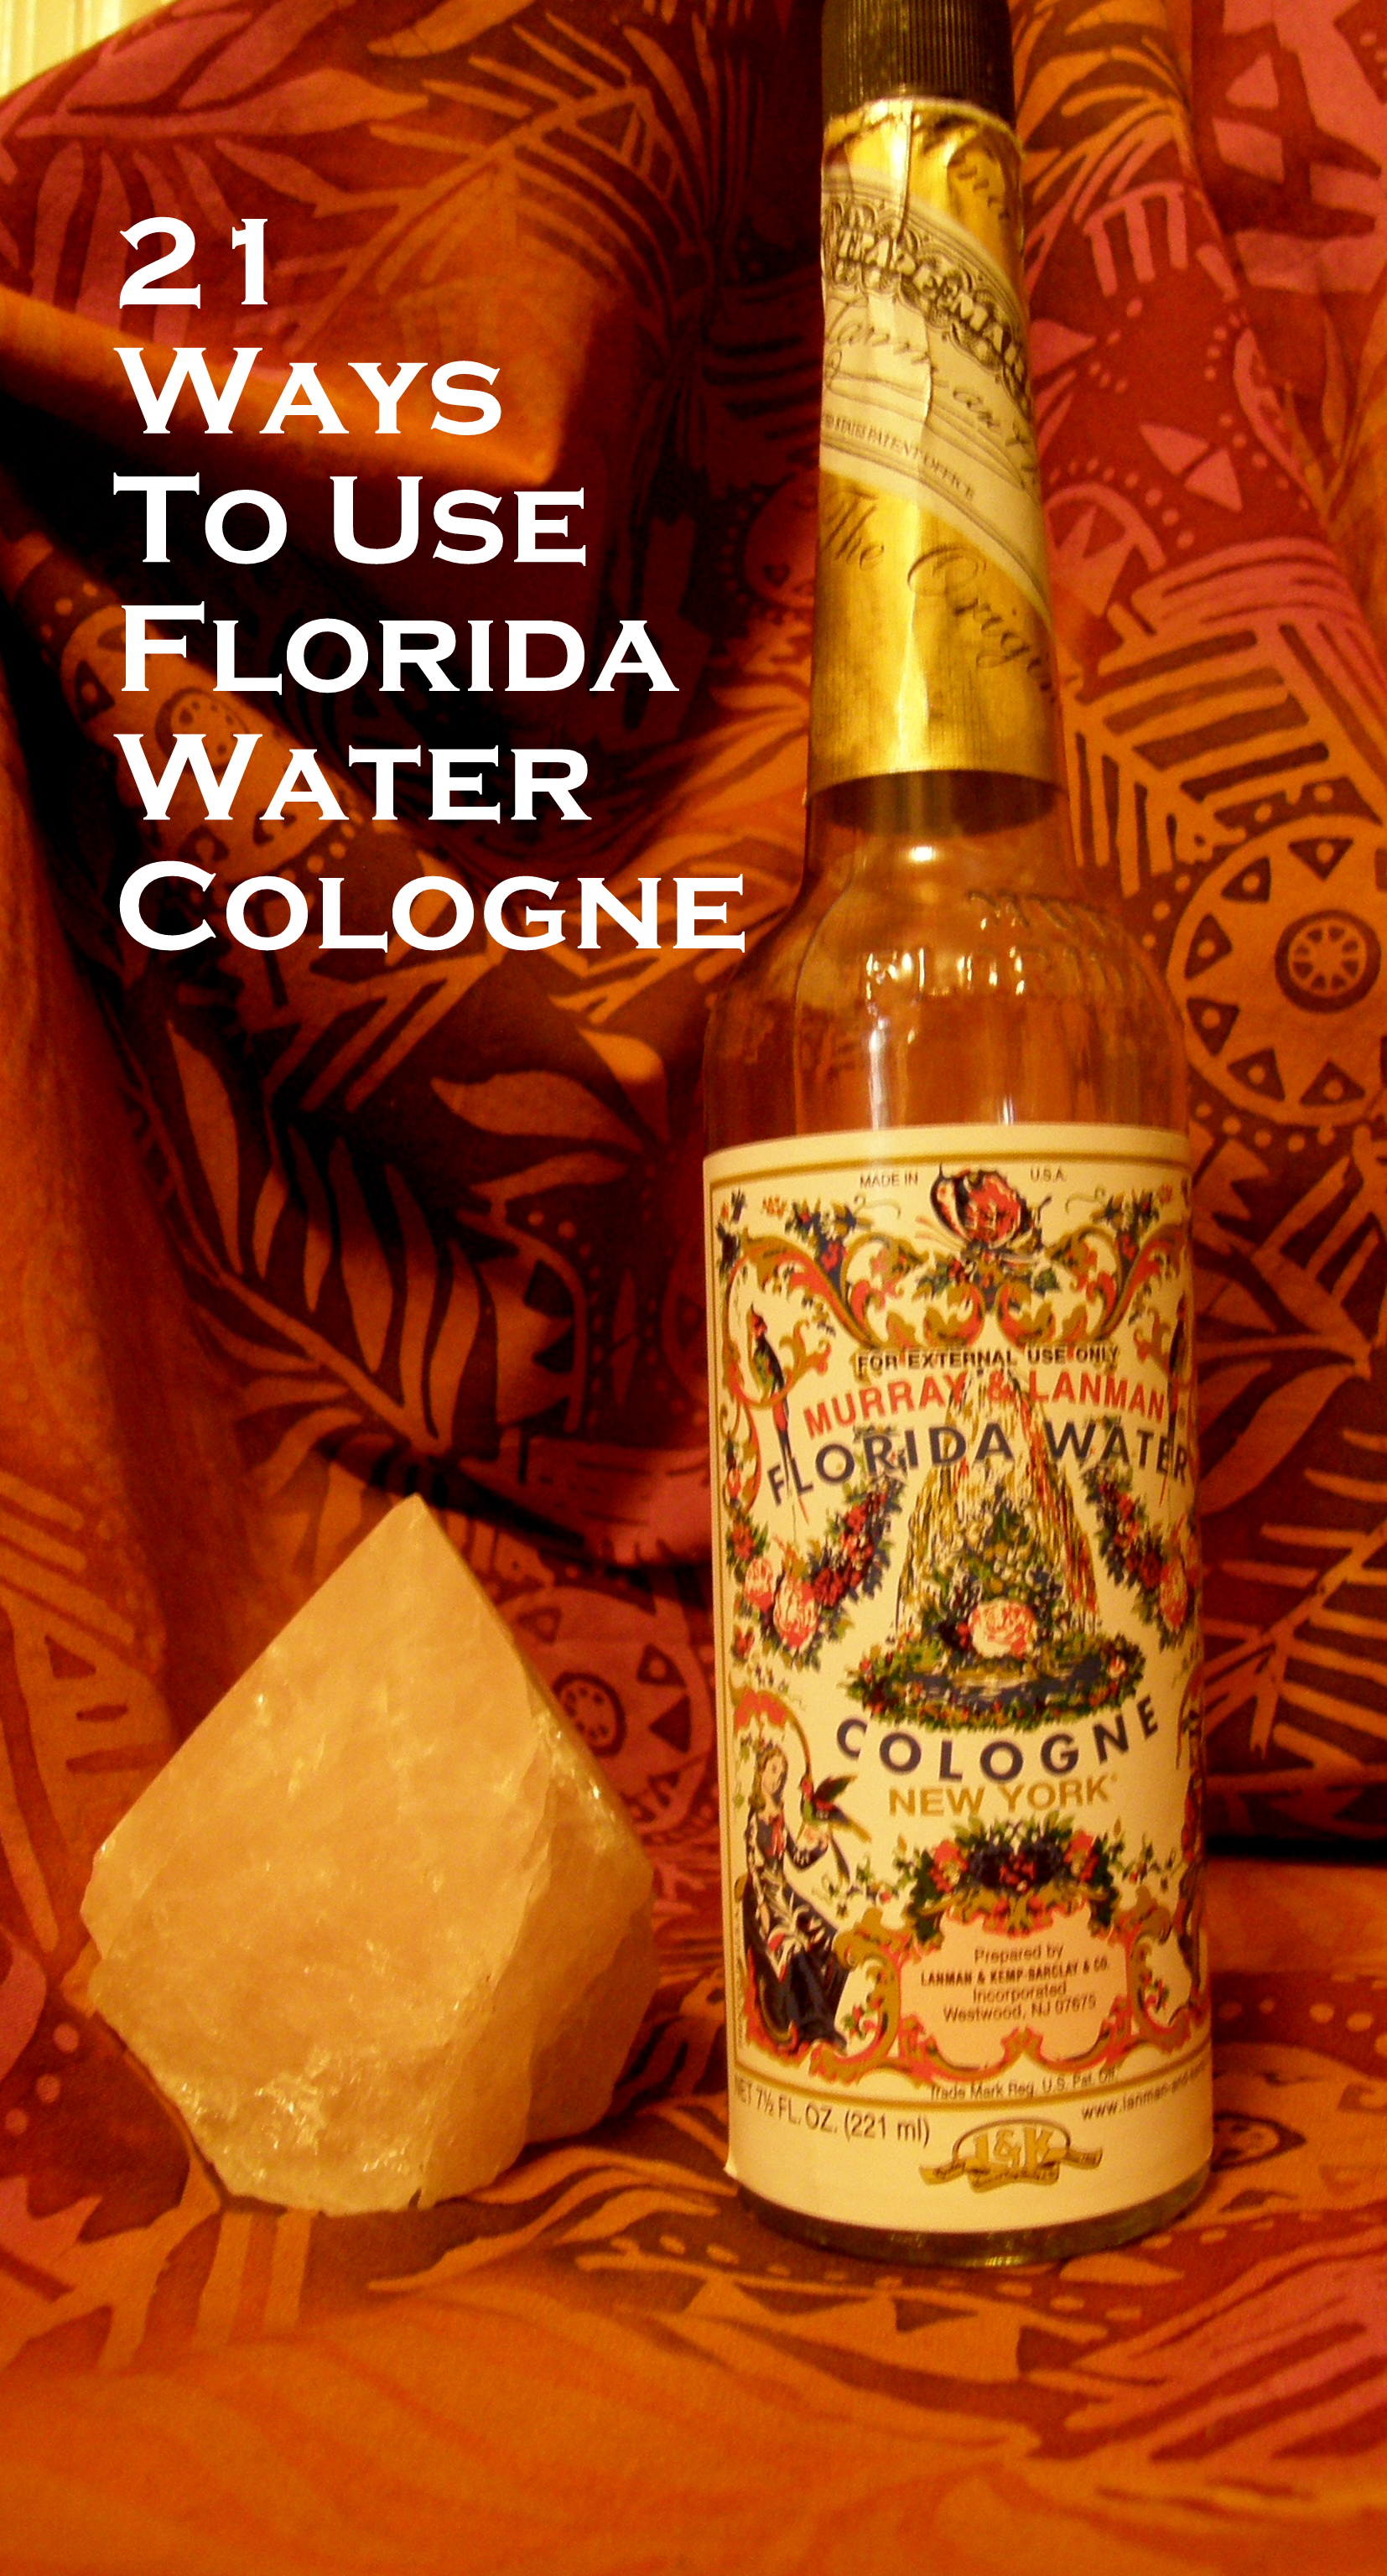 21 Wonderful Ways To Use Florida Water Cologne